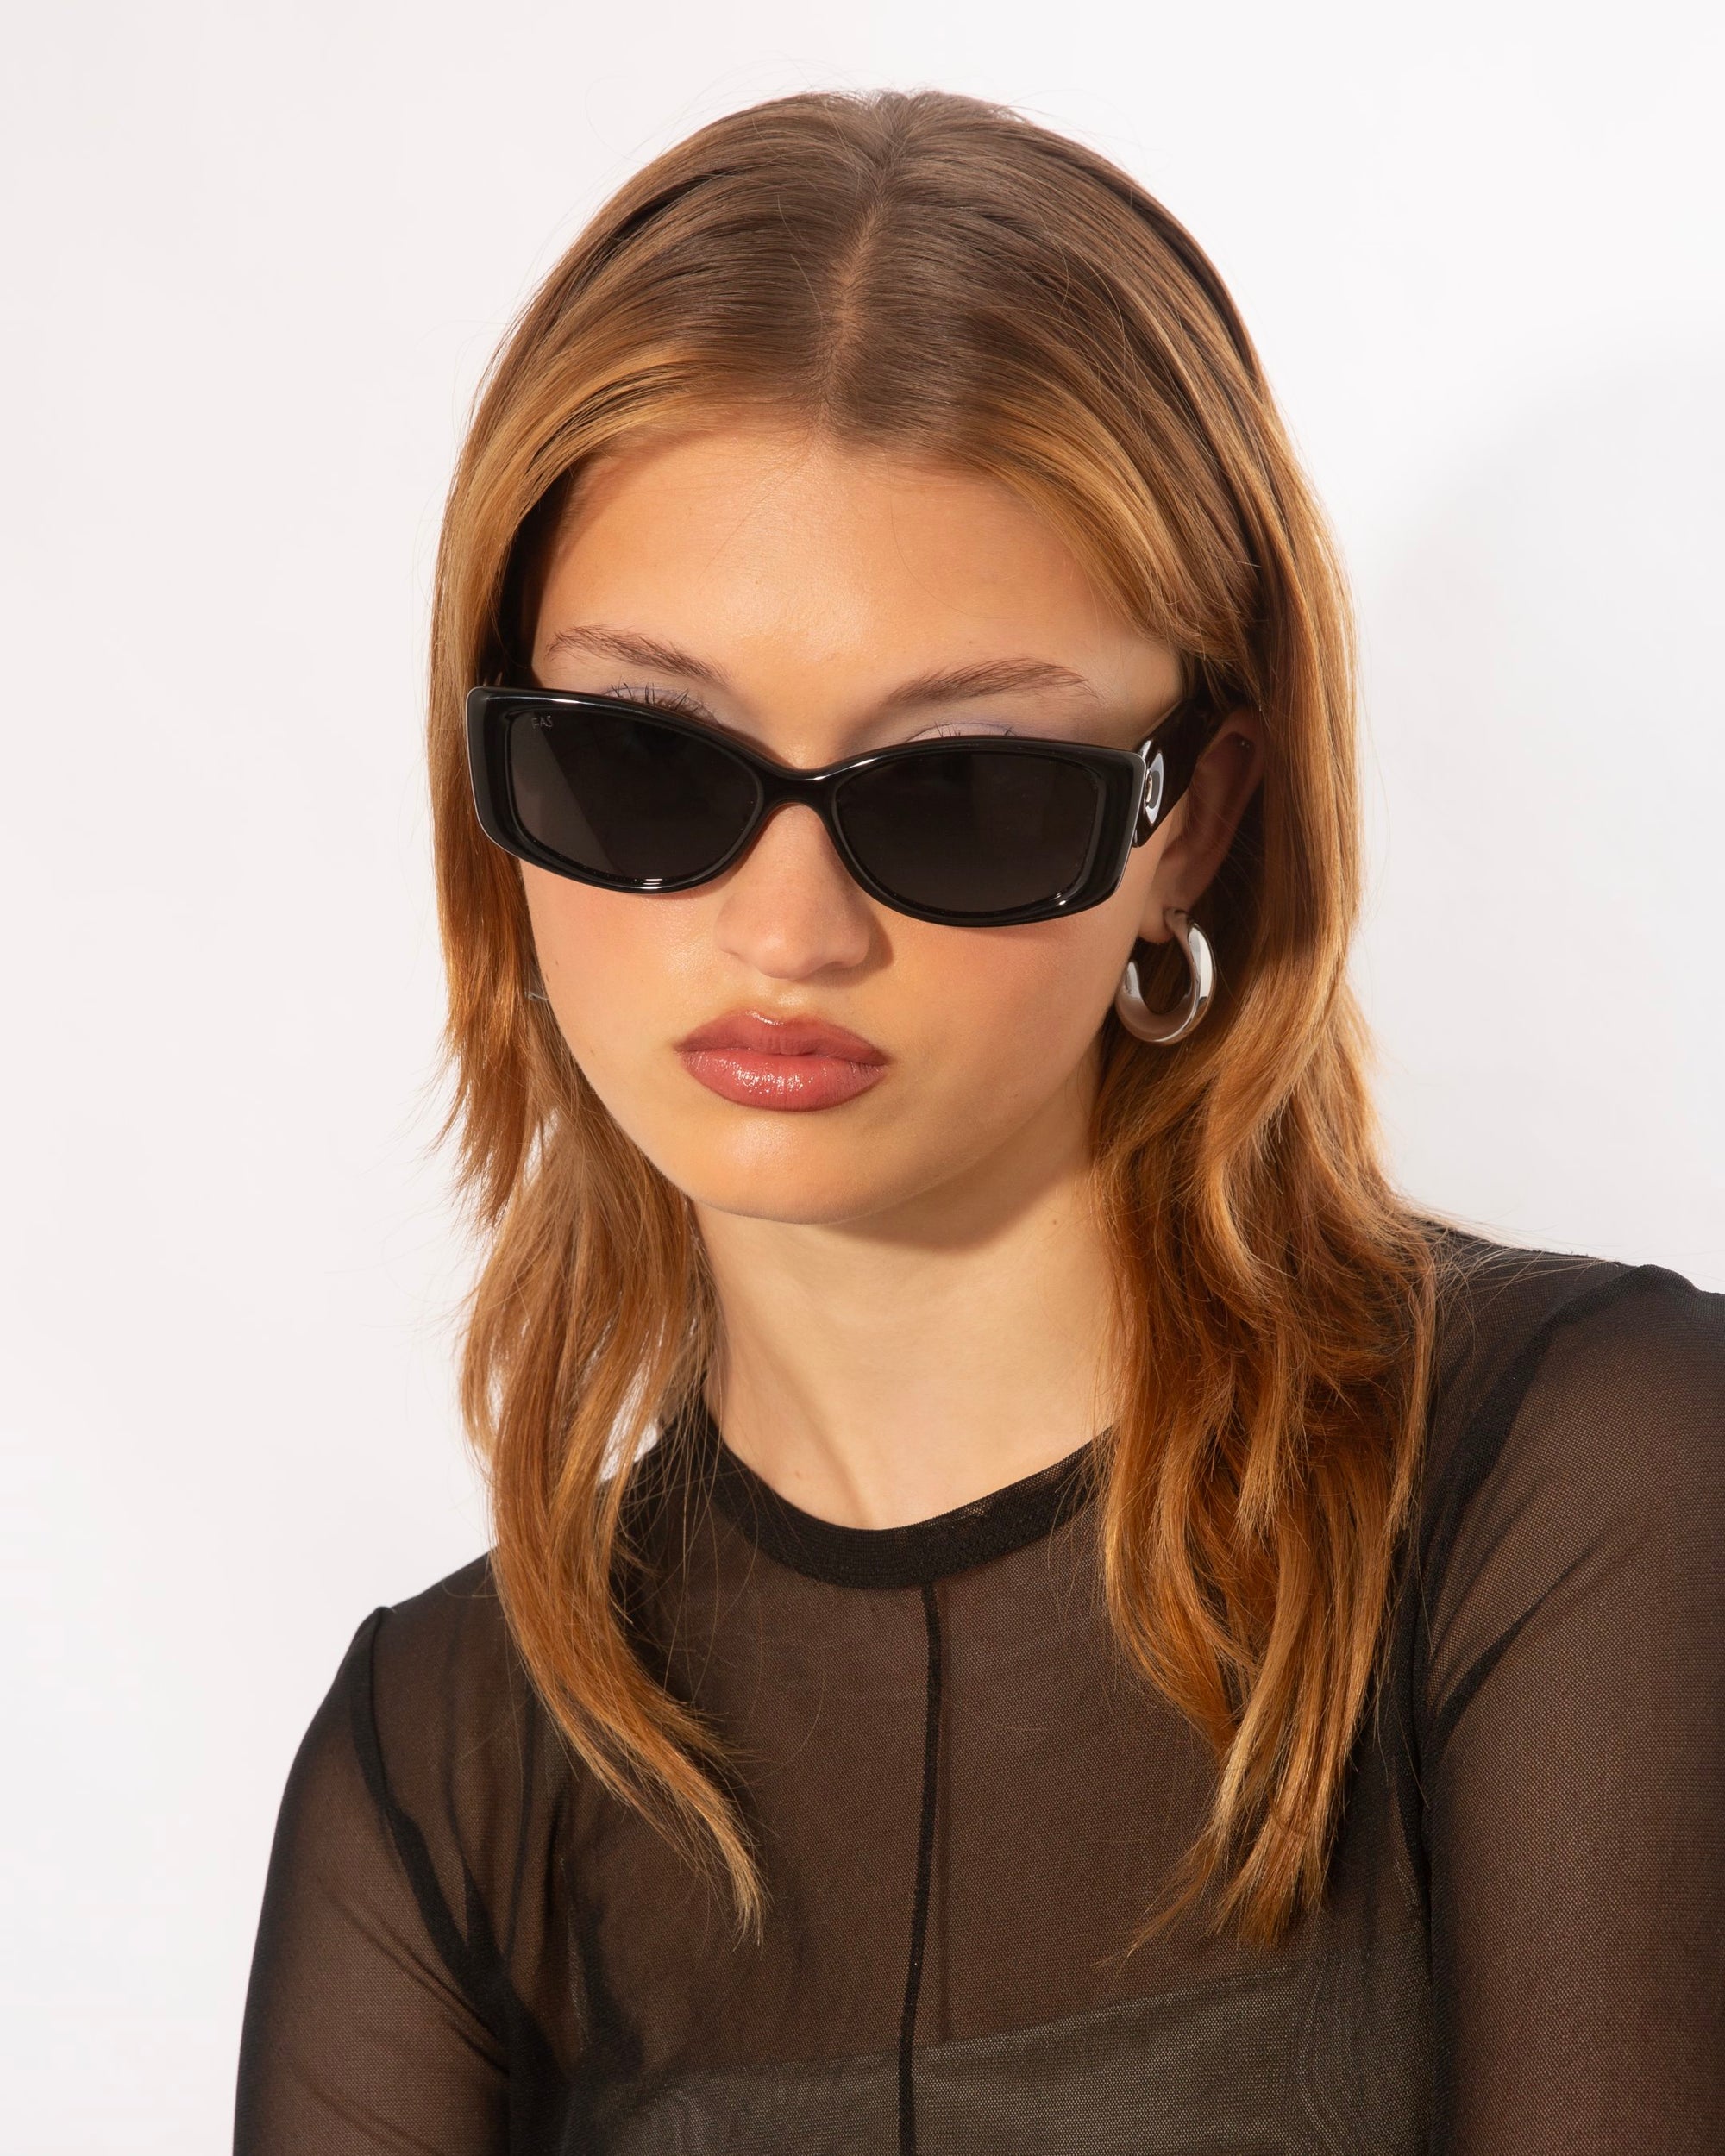 A person with light brown hair, wearing rectangular black For Art&#39;s Sake® Mene sunglasses and silver hoop earrings. Clad in a sheer black top, they have a calm expression and their head slightly tilted, embodying luxury eyewear style against a plain white background.